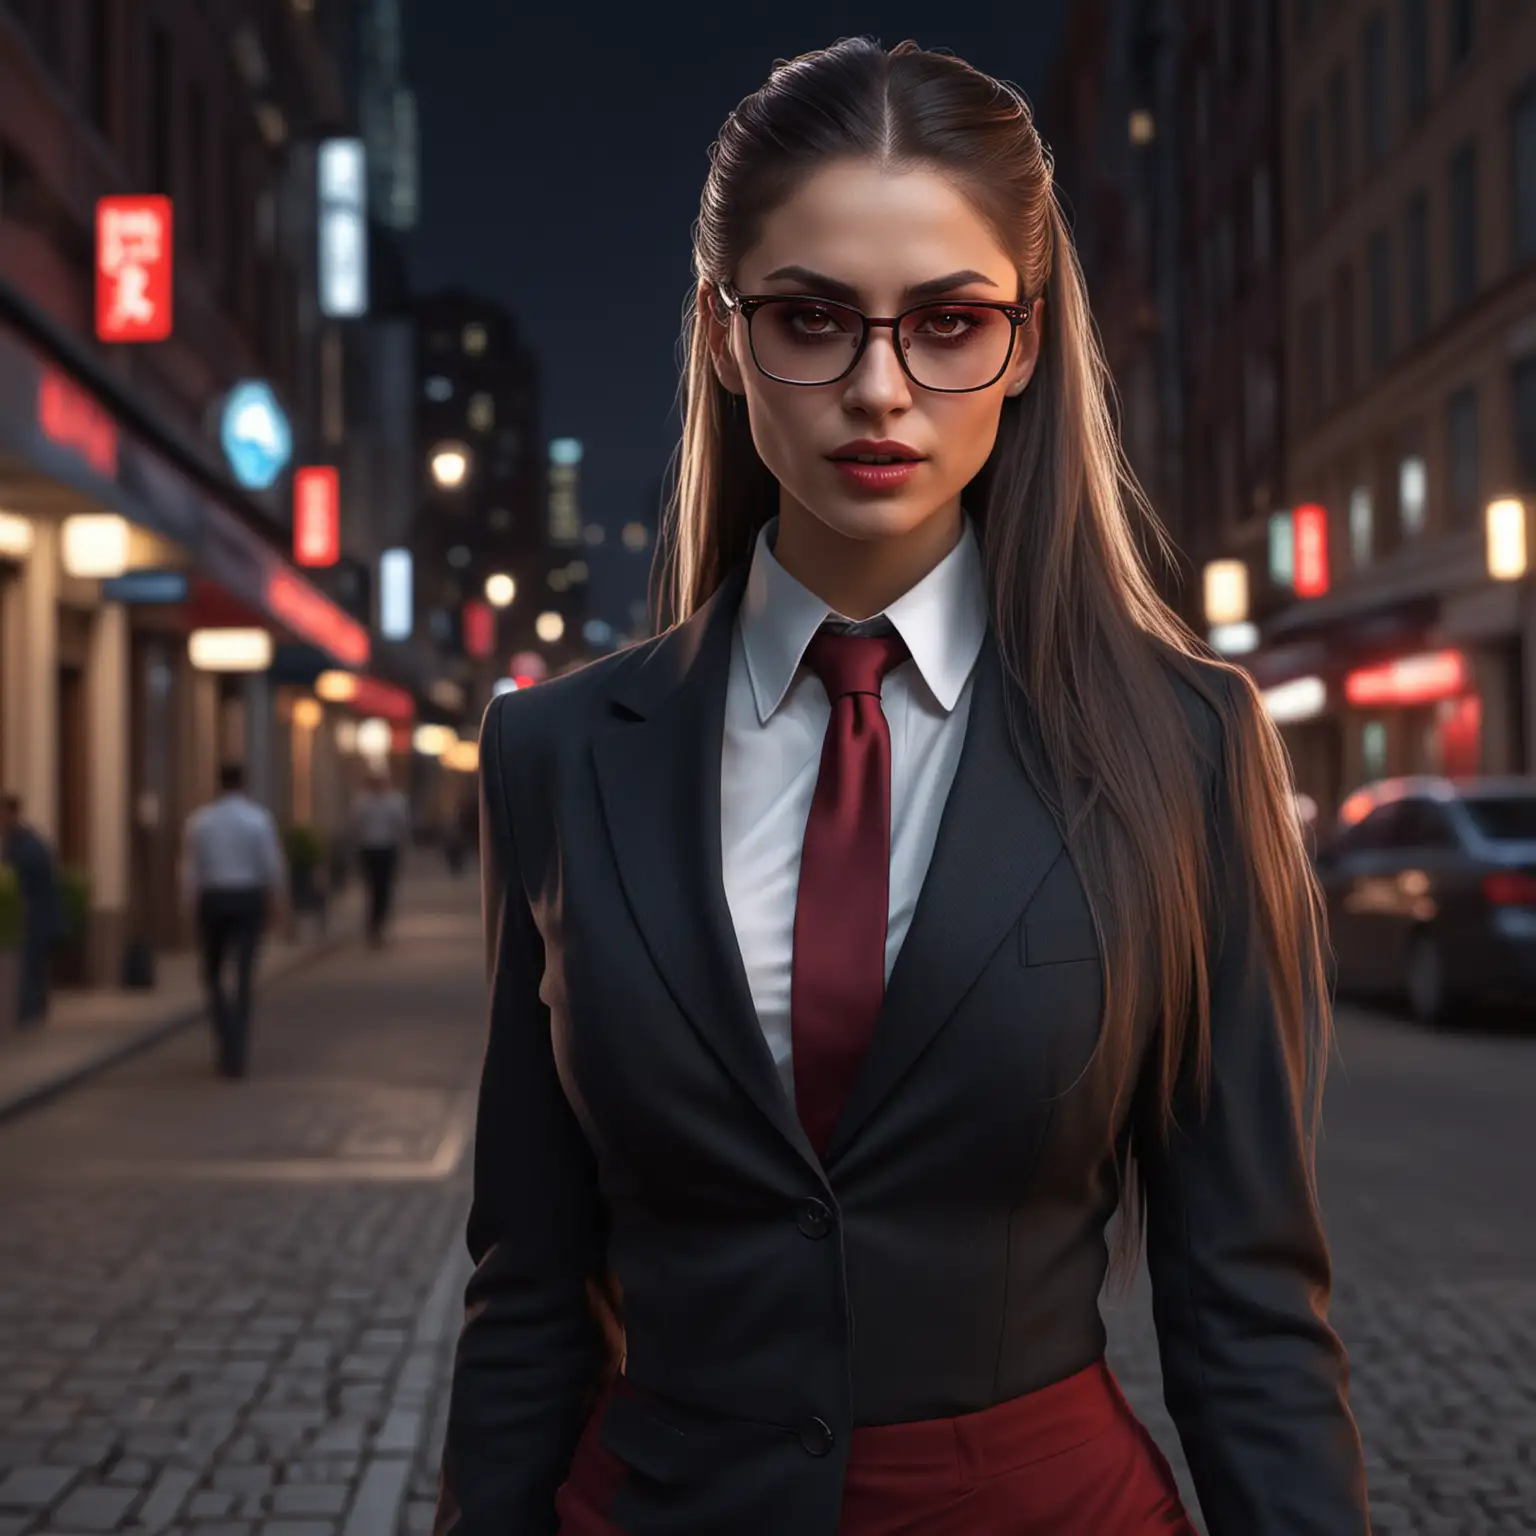 A female Malkavian vampire, long hair, tight ponytail, red glowing eyes, glasses, businesswoman, wearing a suit, long skirt, walking outside on the street at night, realistic